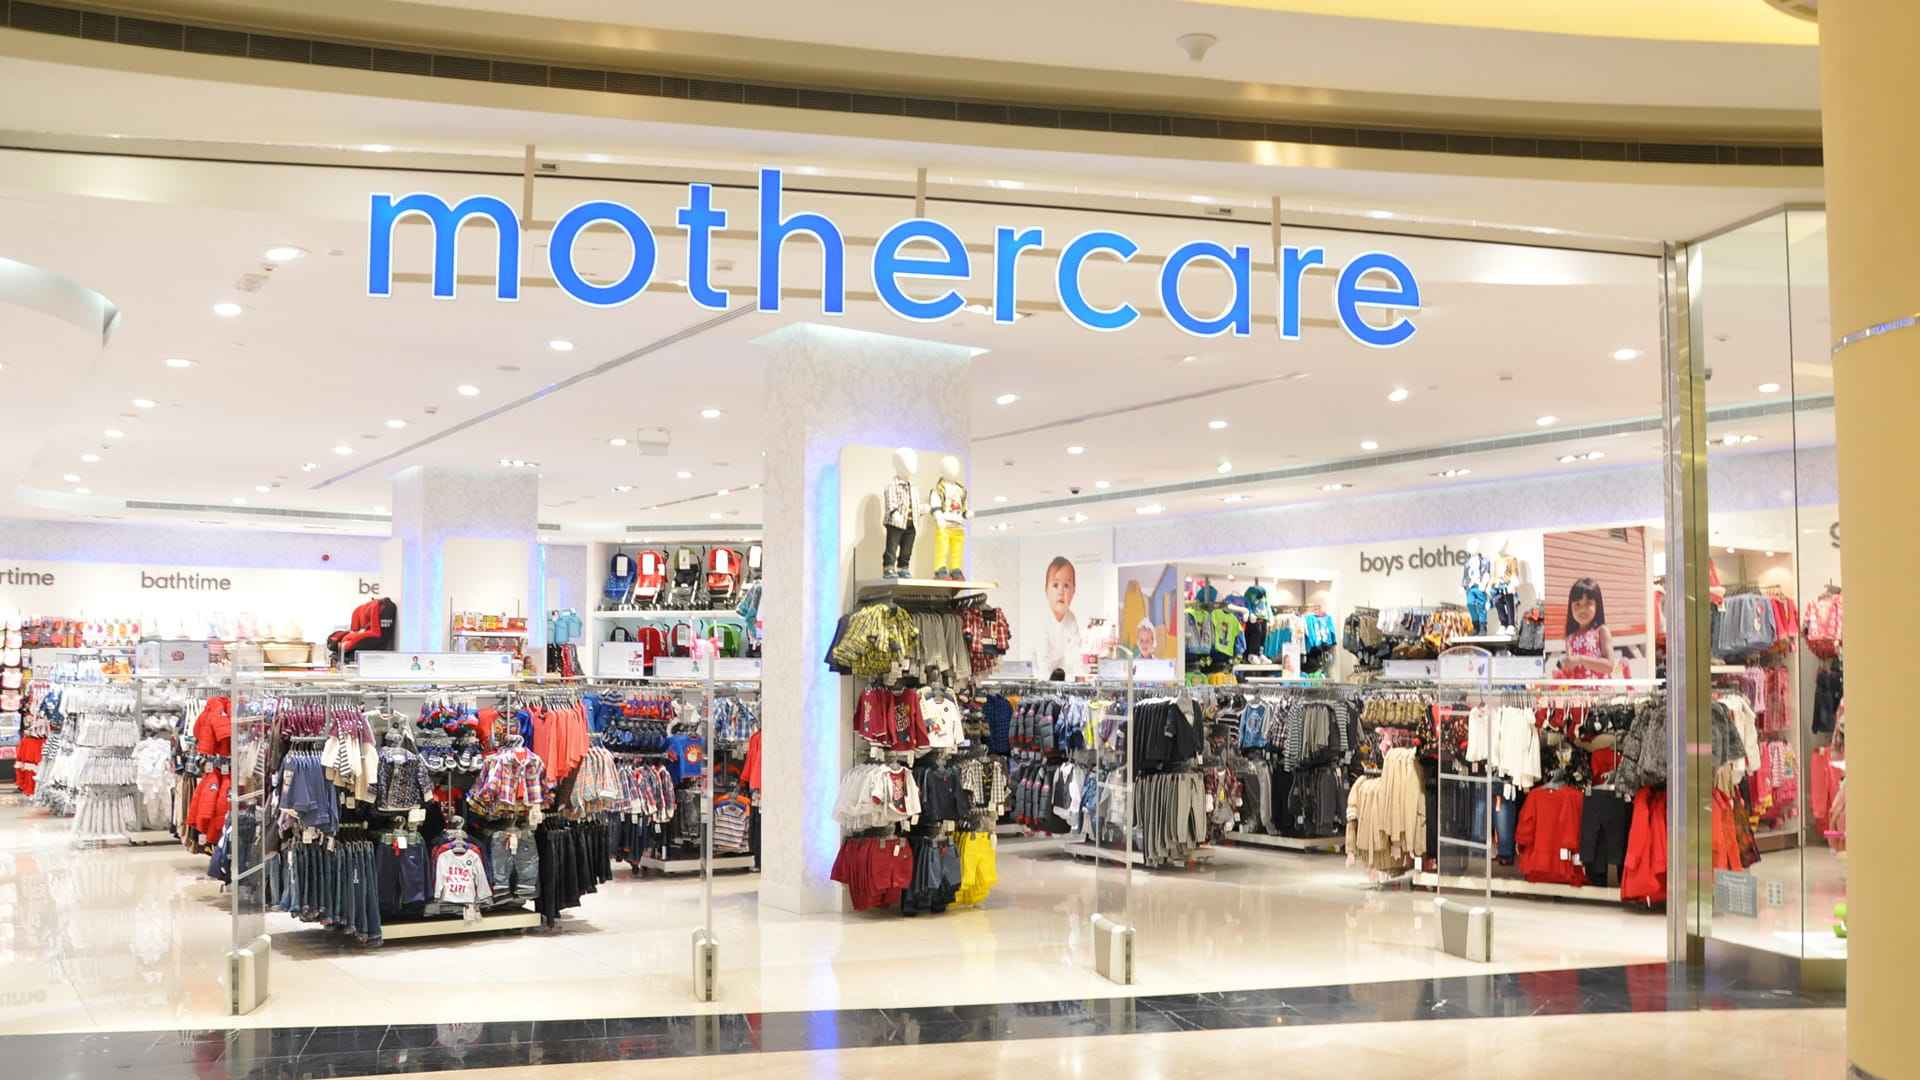 Mothercare announces closure of 60 stores resulting in loss of 900 jobs